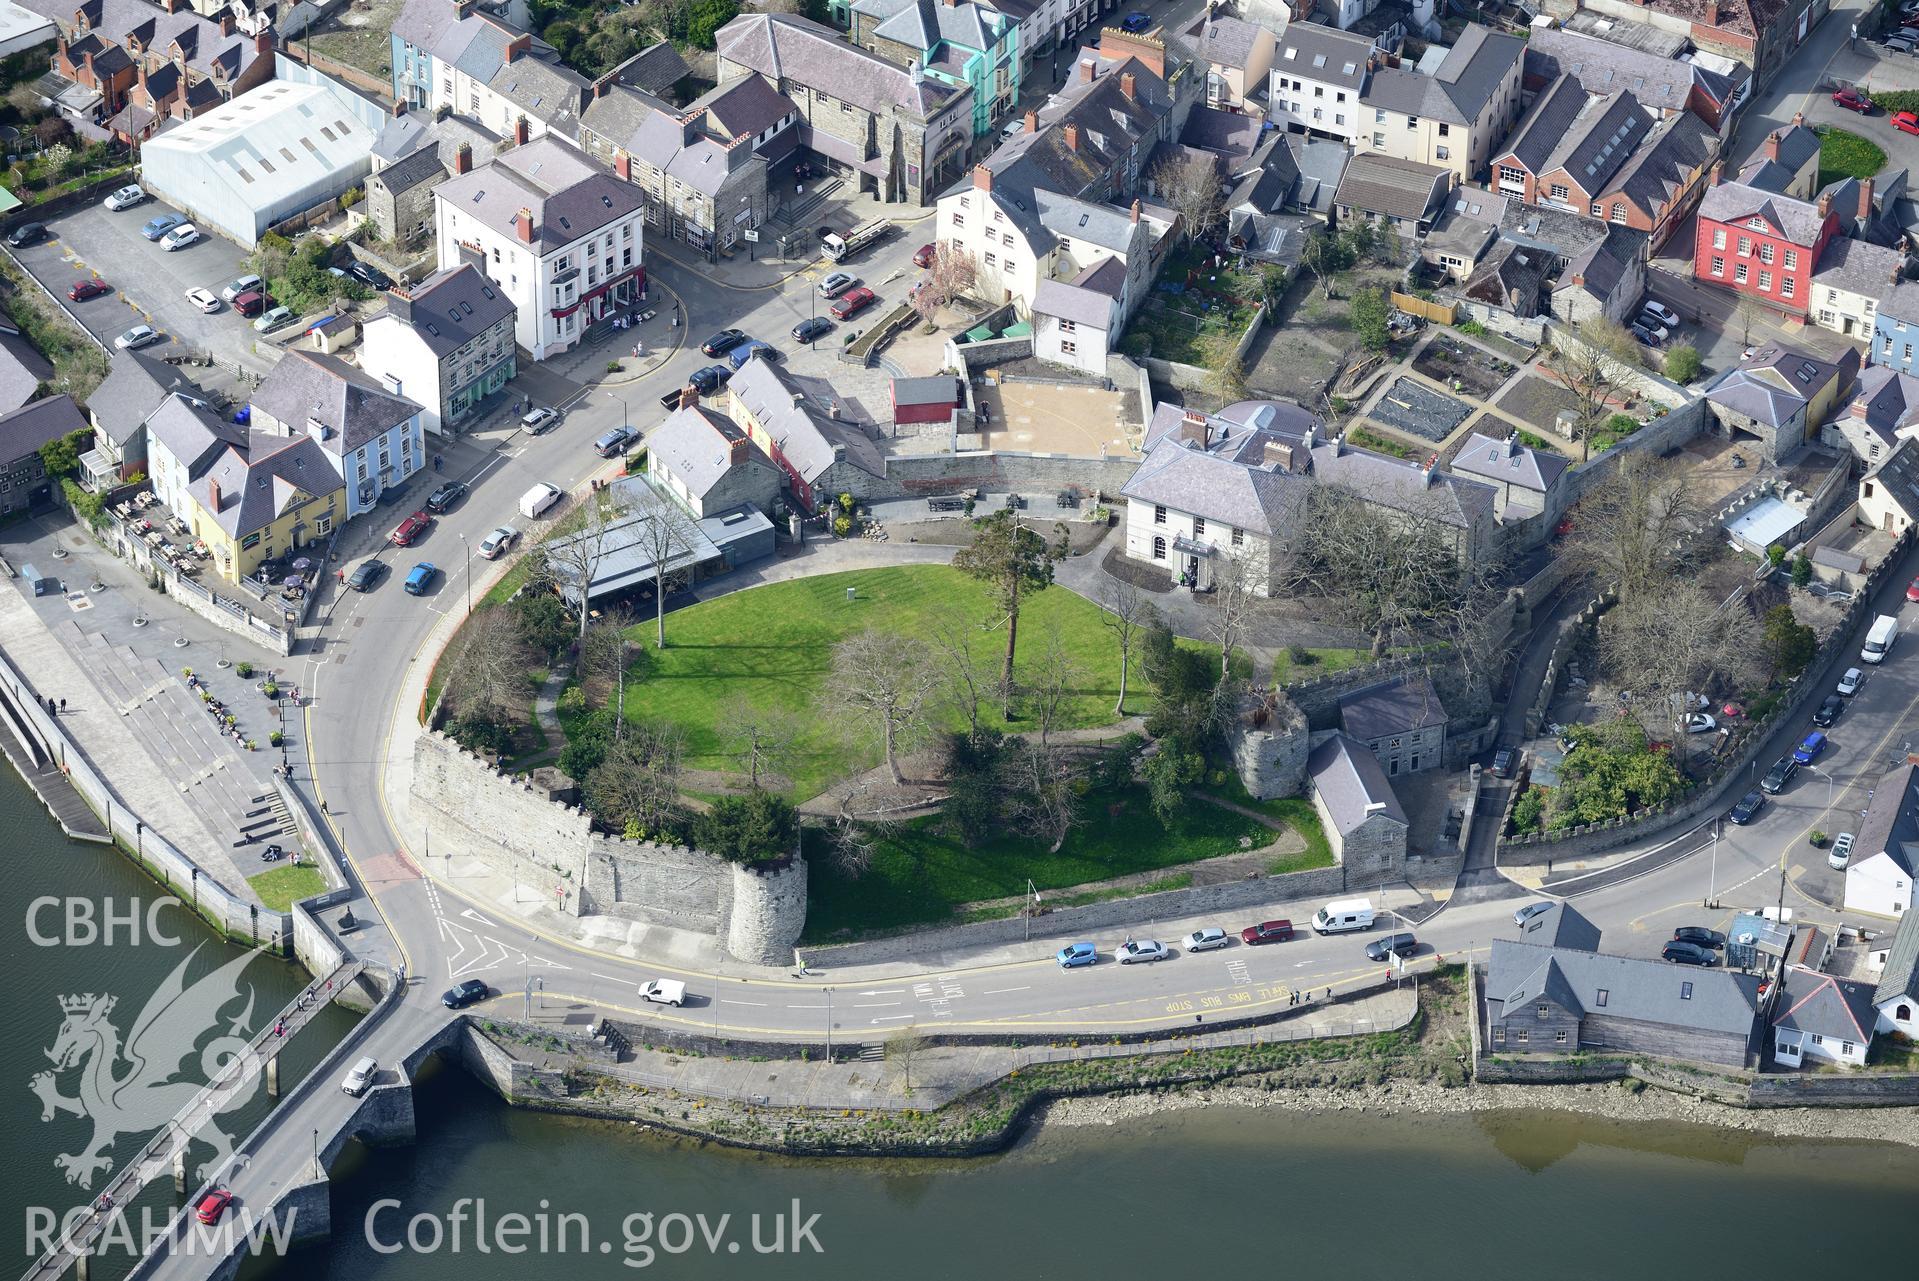 Cardigan Town, Castle, Castle House, Castle Stables, Castle Chambers and Grosvenor Hotel. Oblique aerial photograph taken during the Royal Commission's programme of archaeological aerial reconnaissance by Toby Driver 15th April 2015.